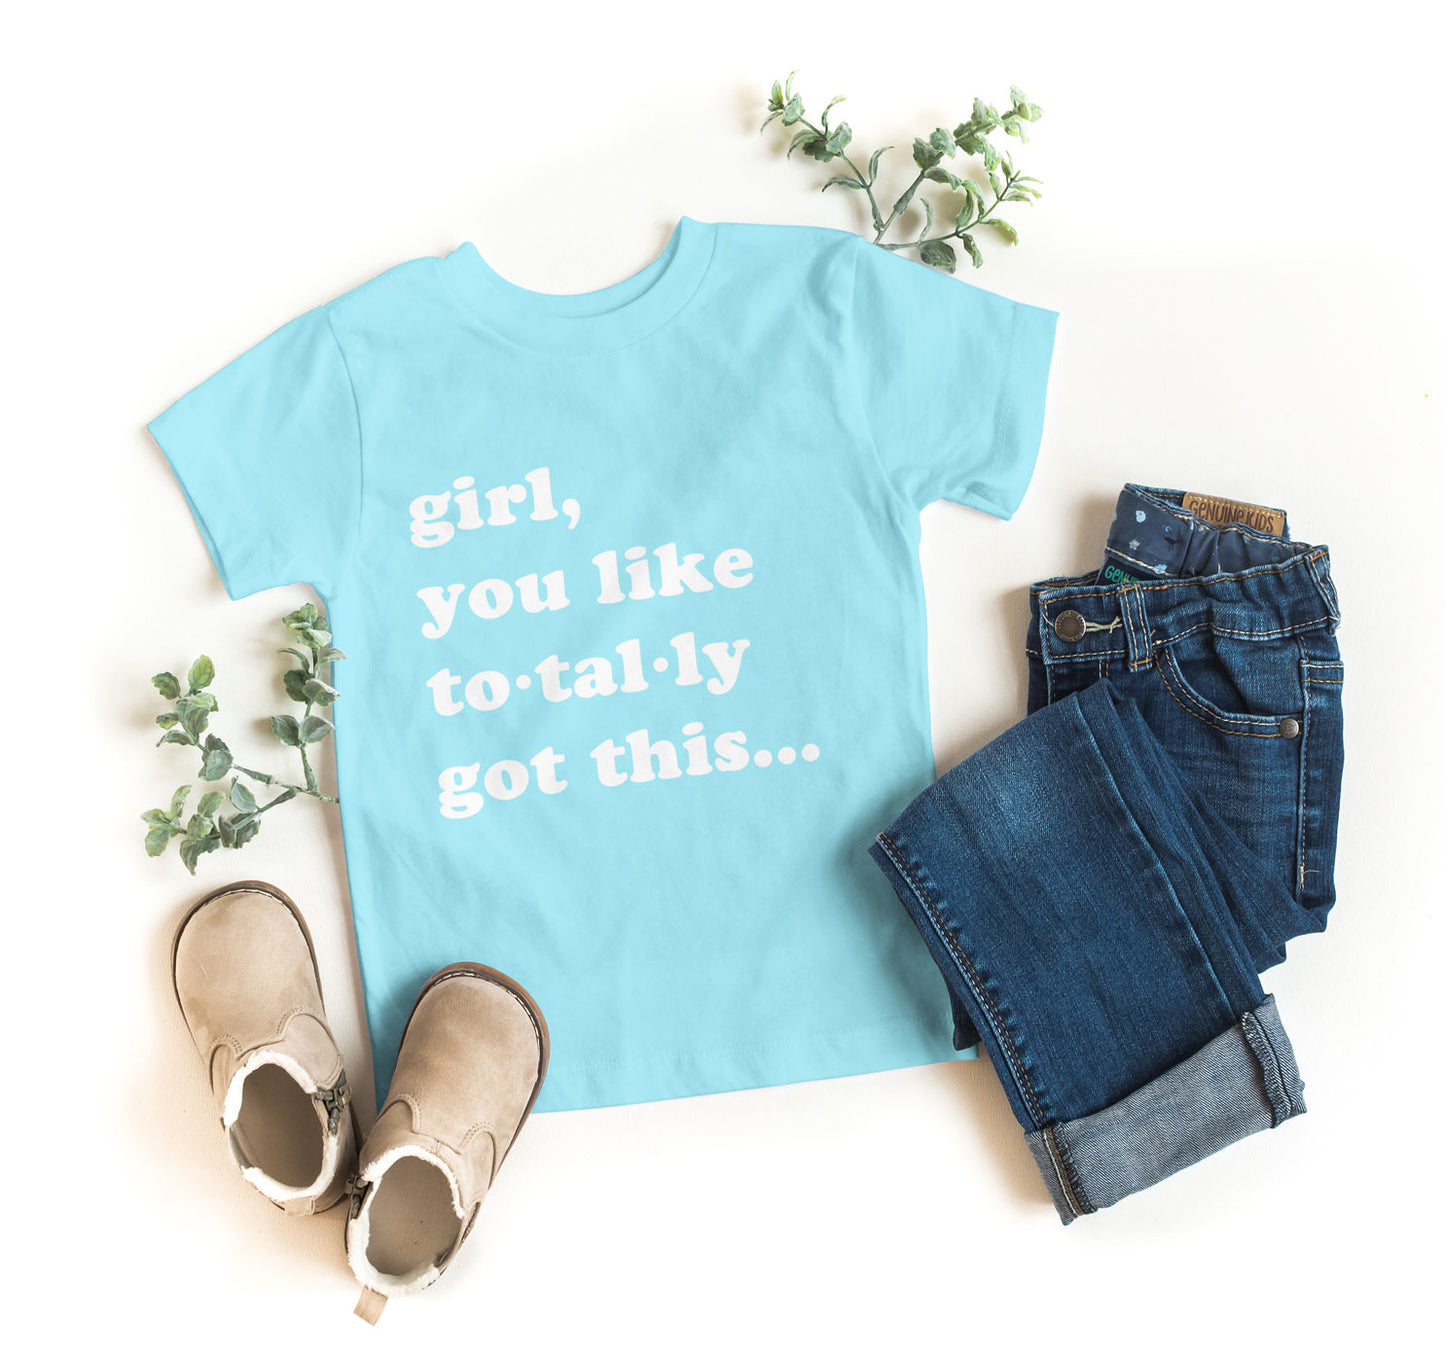 Totally Got This - Teal Tee